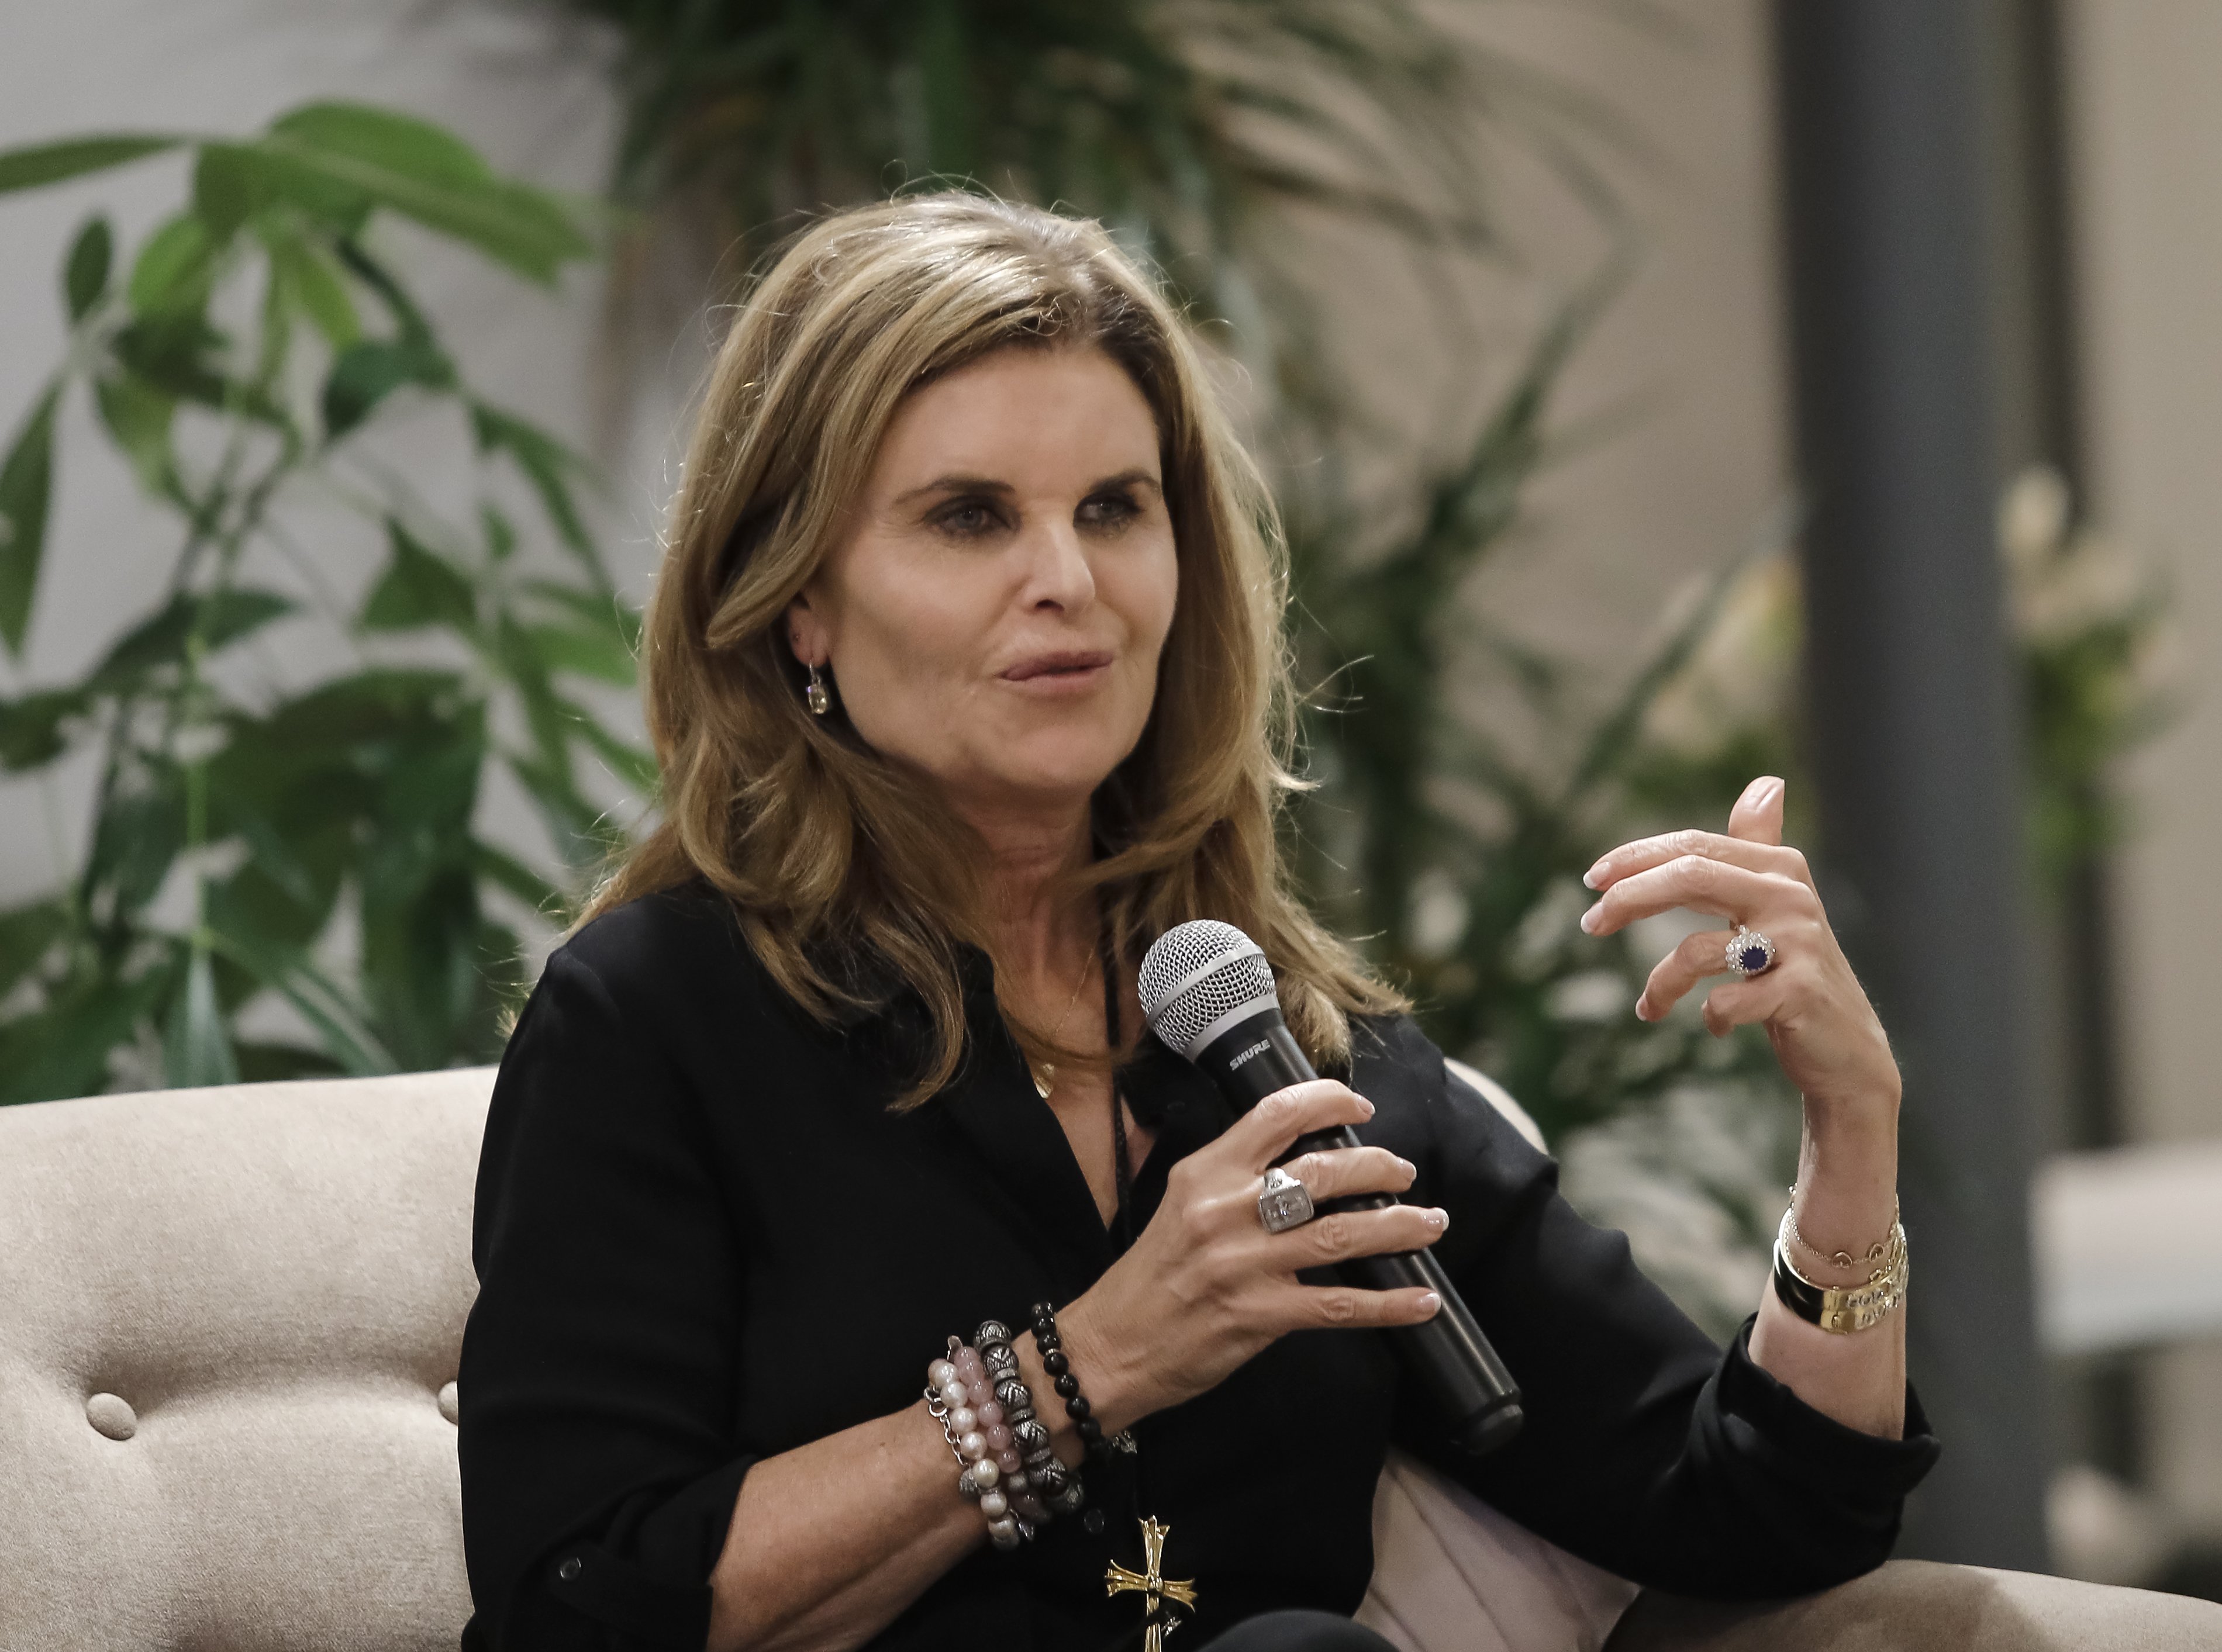 Maria Shriver speaks at the Riverter in Los Angeles, California on January 15, 2019 | Photo: Getty Images